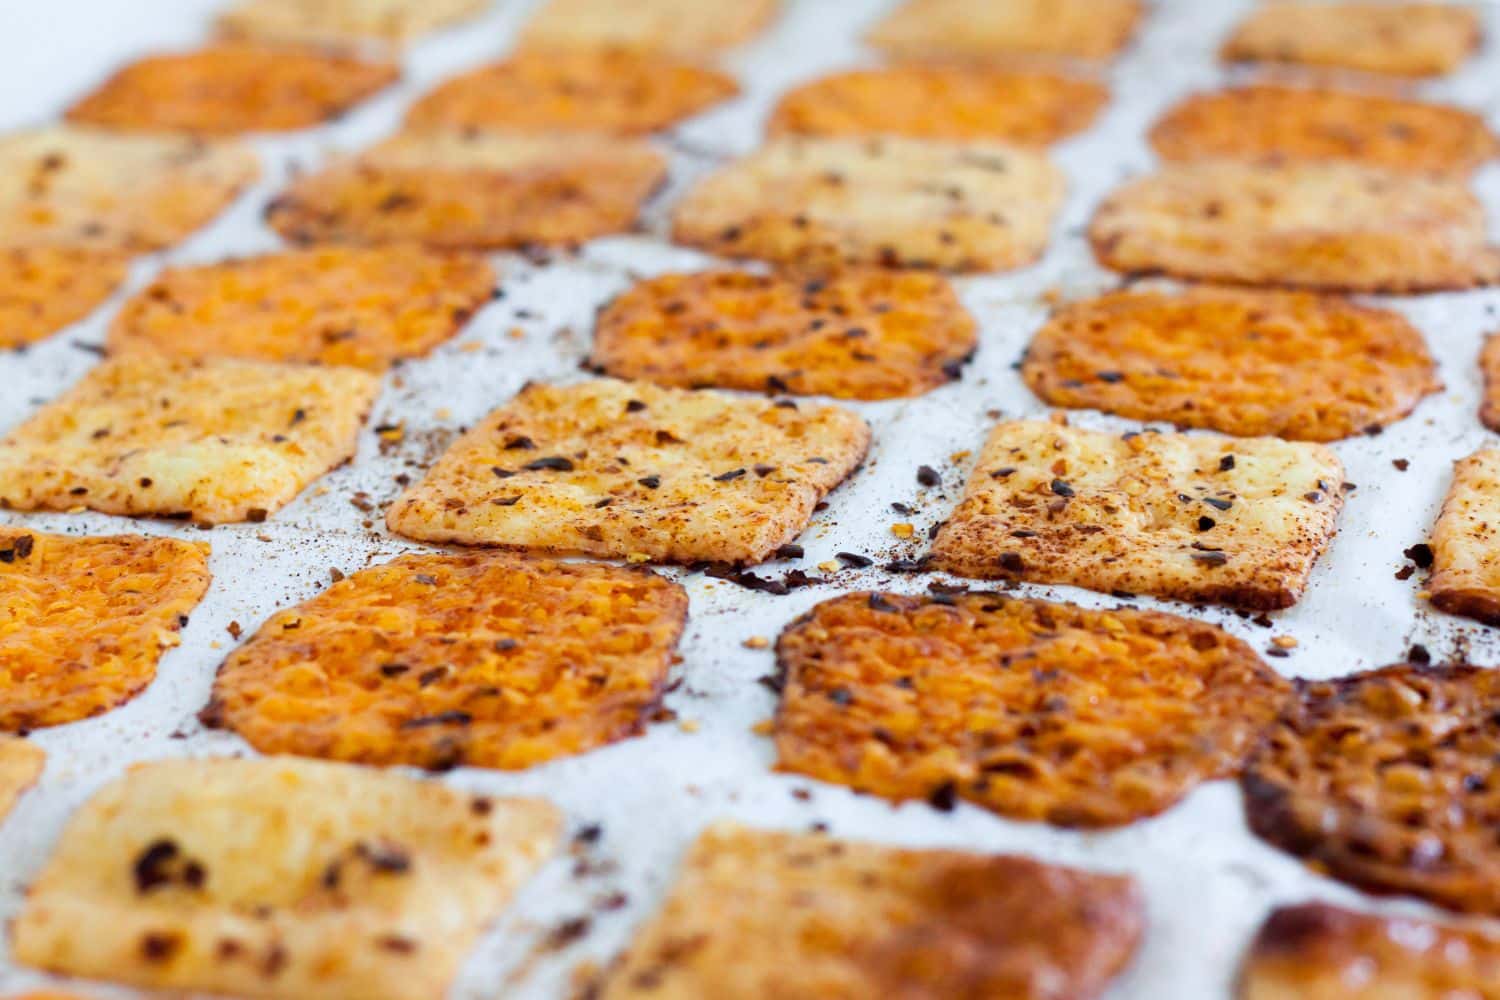 process image of finished keto baked cheese crackers